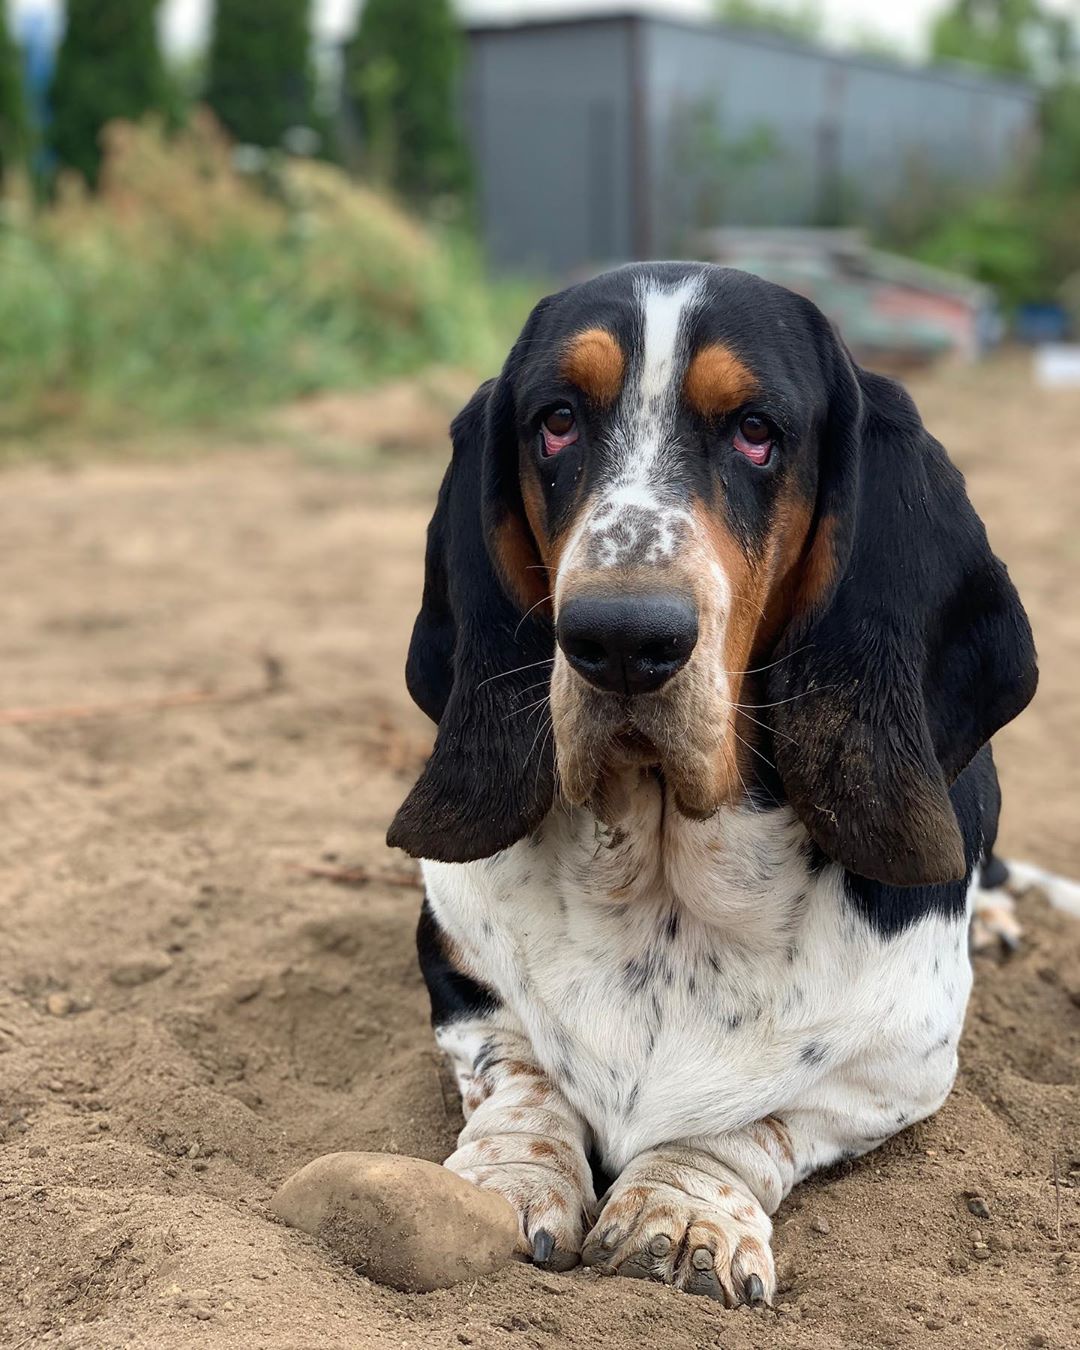 A Basset Hound lying in the sand